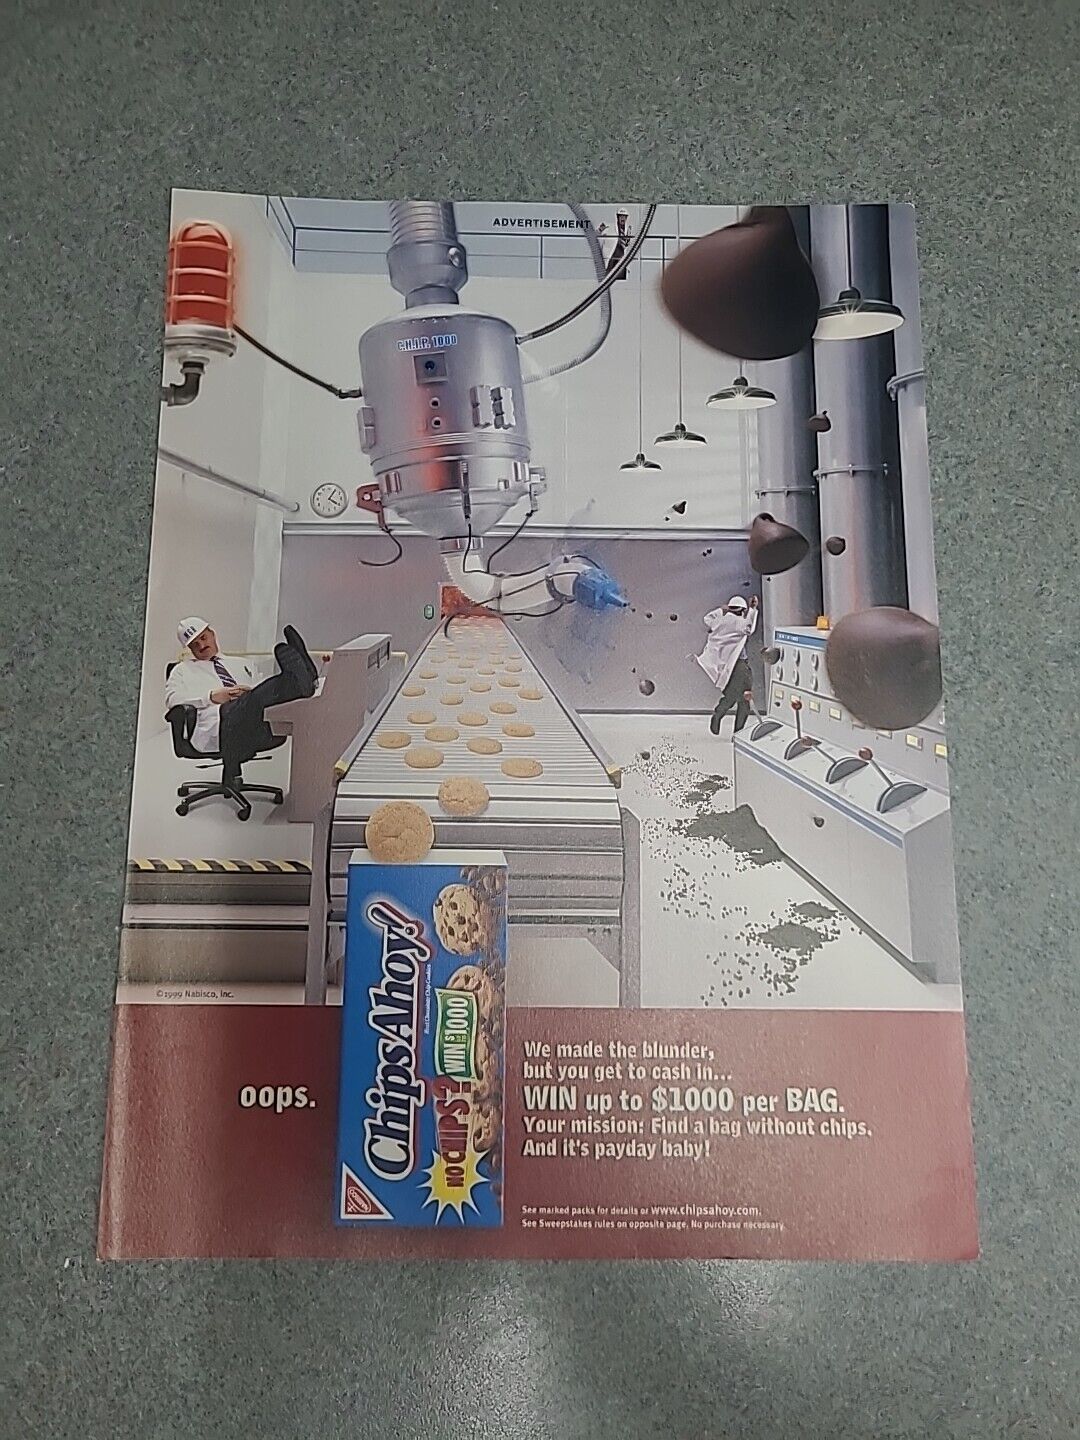 Chips Ahoy No Chips Sweepstakes Print Ad 1999 8x11 Wall Art Decor 